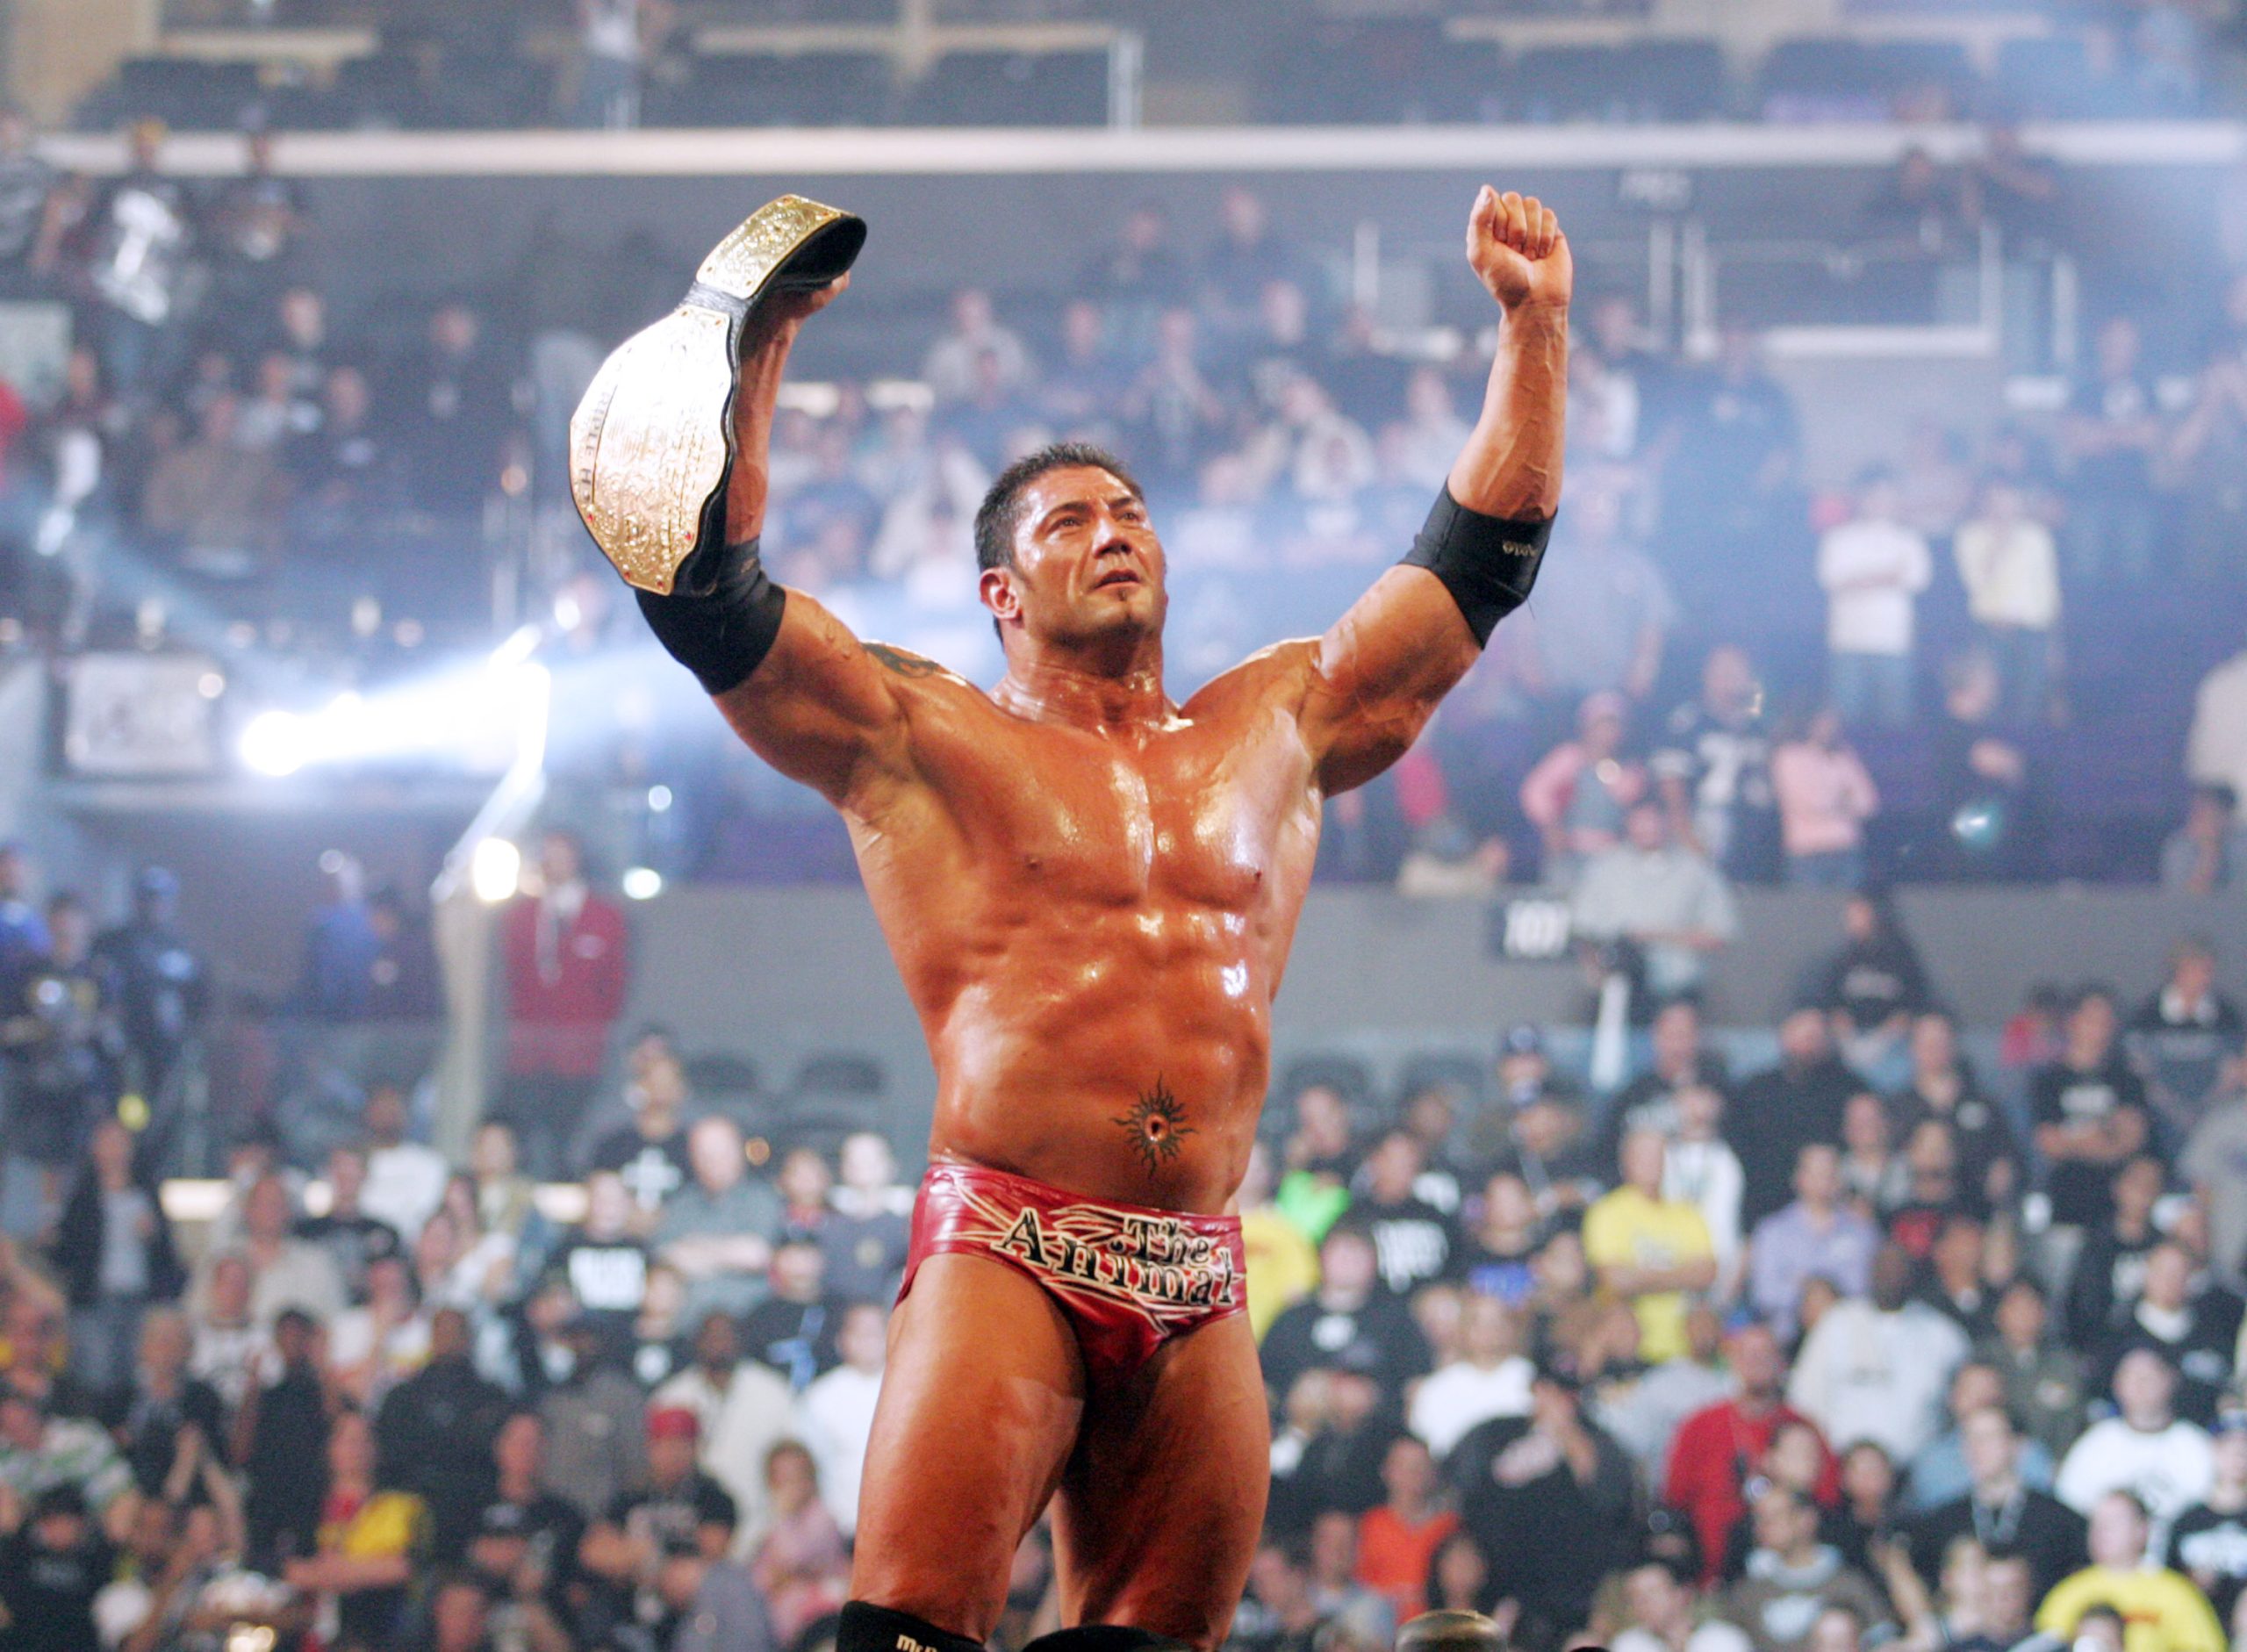 Dave Batista: The Animal's Journey in the Wrestling World